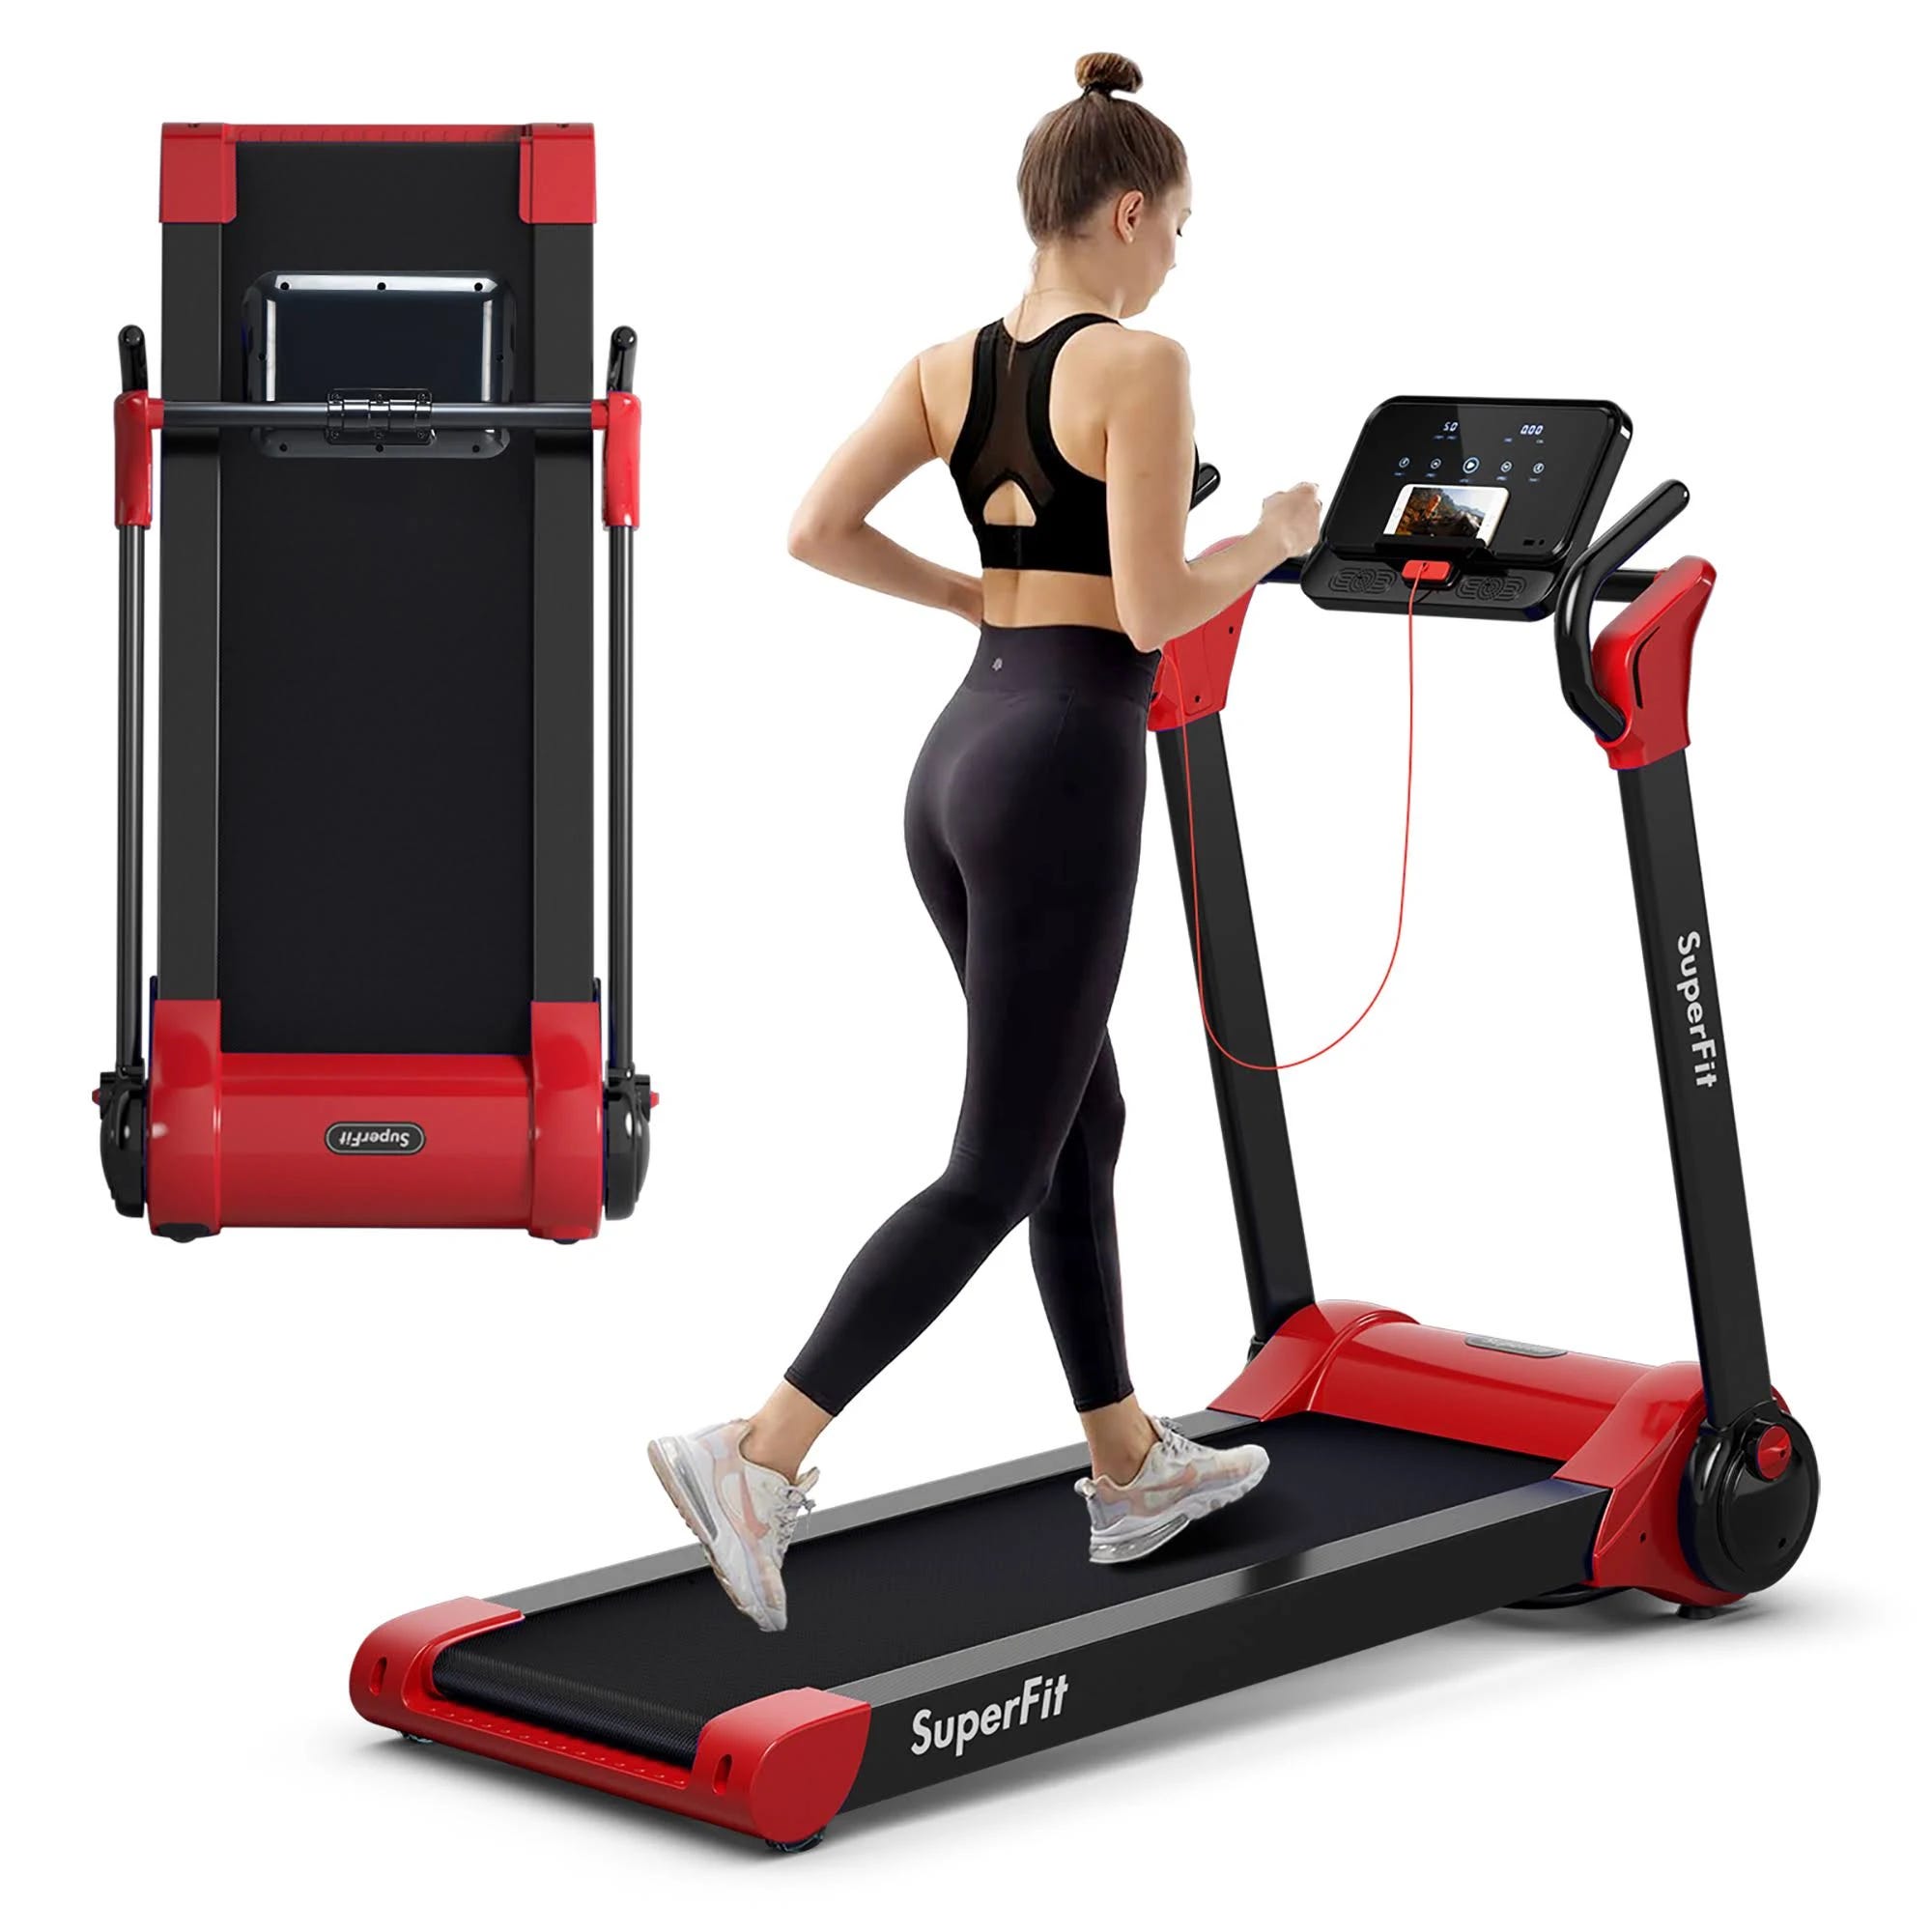 SuperFit Portable Folding Electric Treadmill for Running | Image